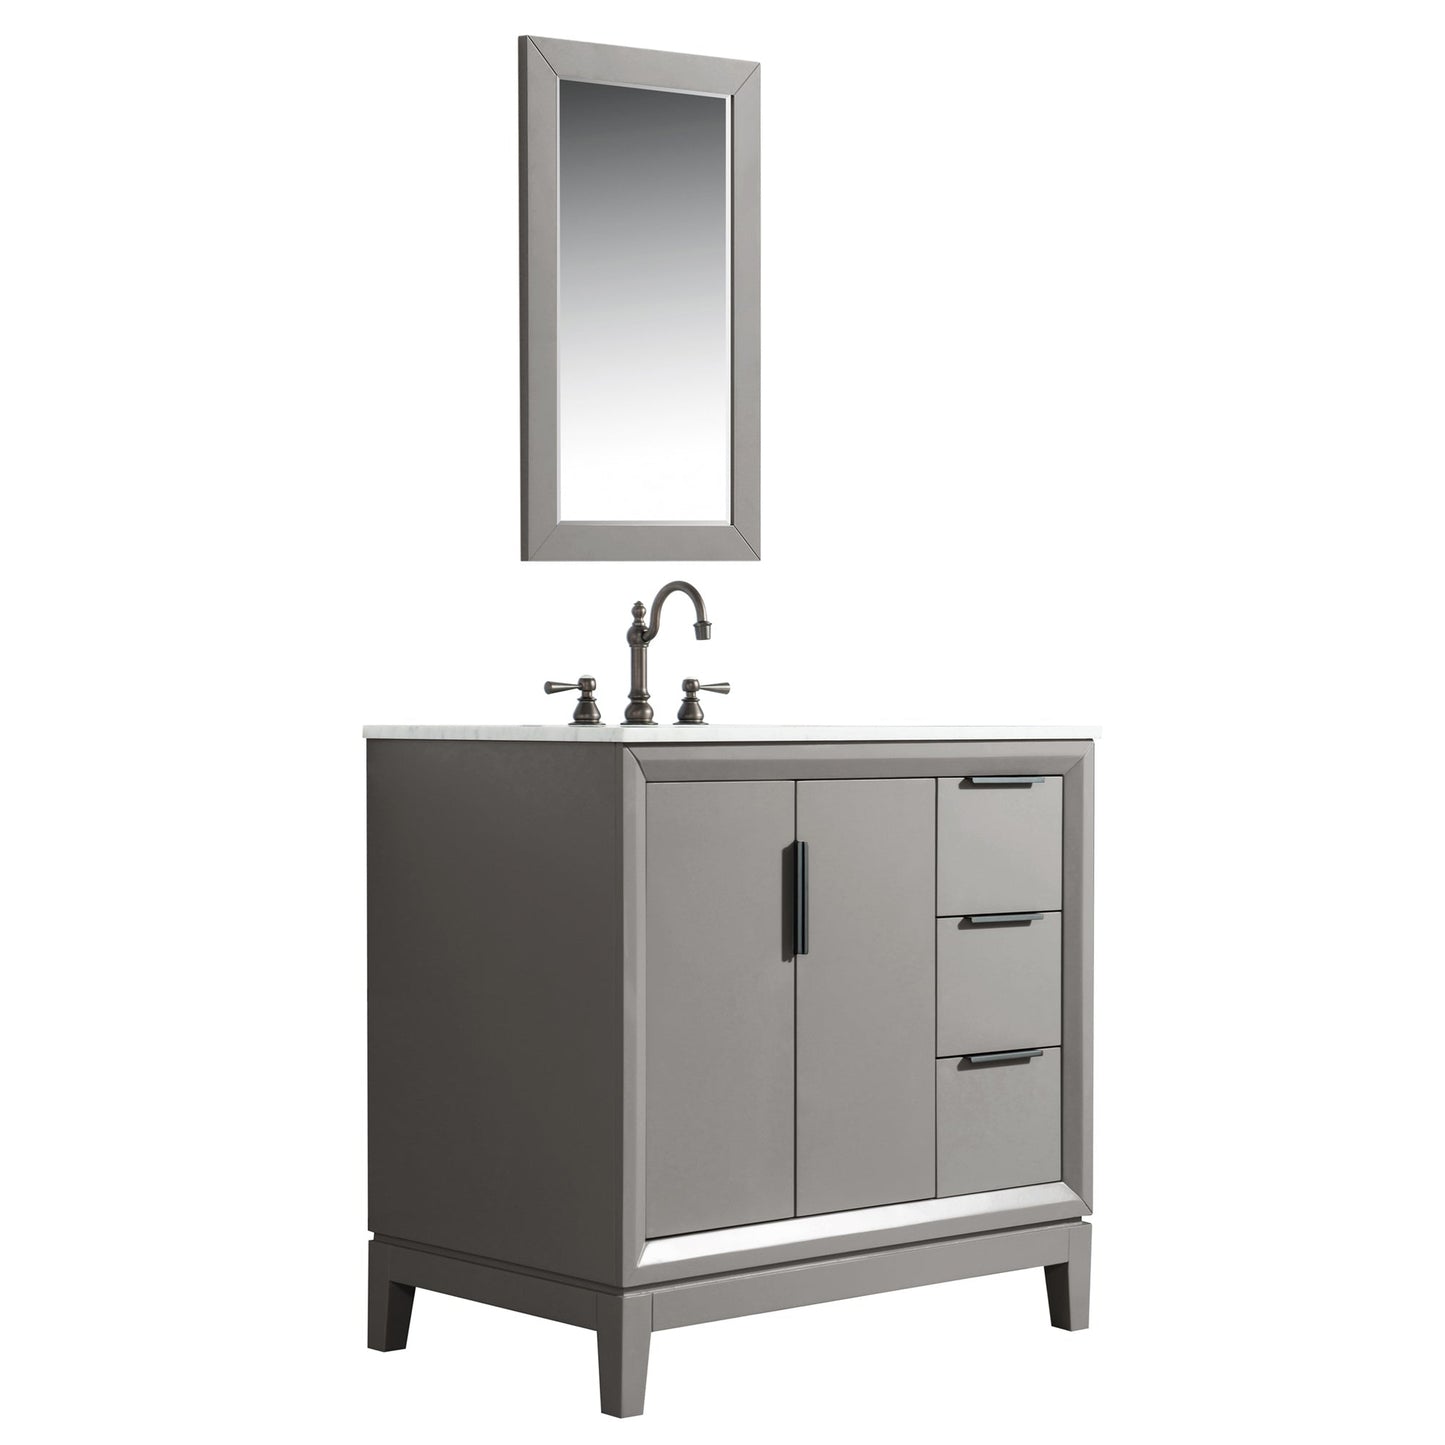 Water Creation Elizabeth 36" Single Sink Carrara White Marble Vanity In Cashmere Grey With Matching Mirror and F2-0012-03-TL Lavatory Faucet